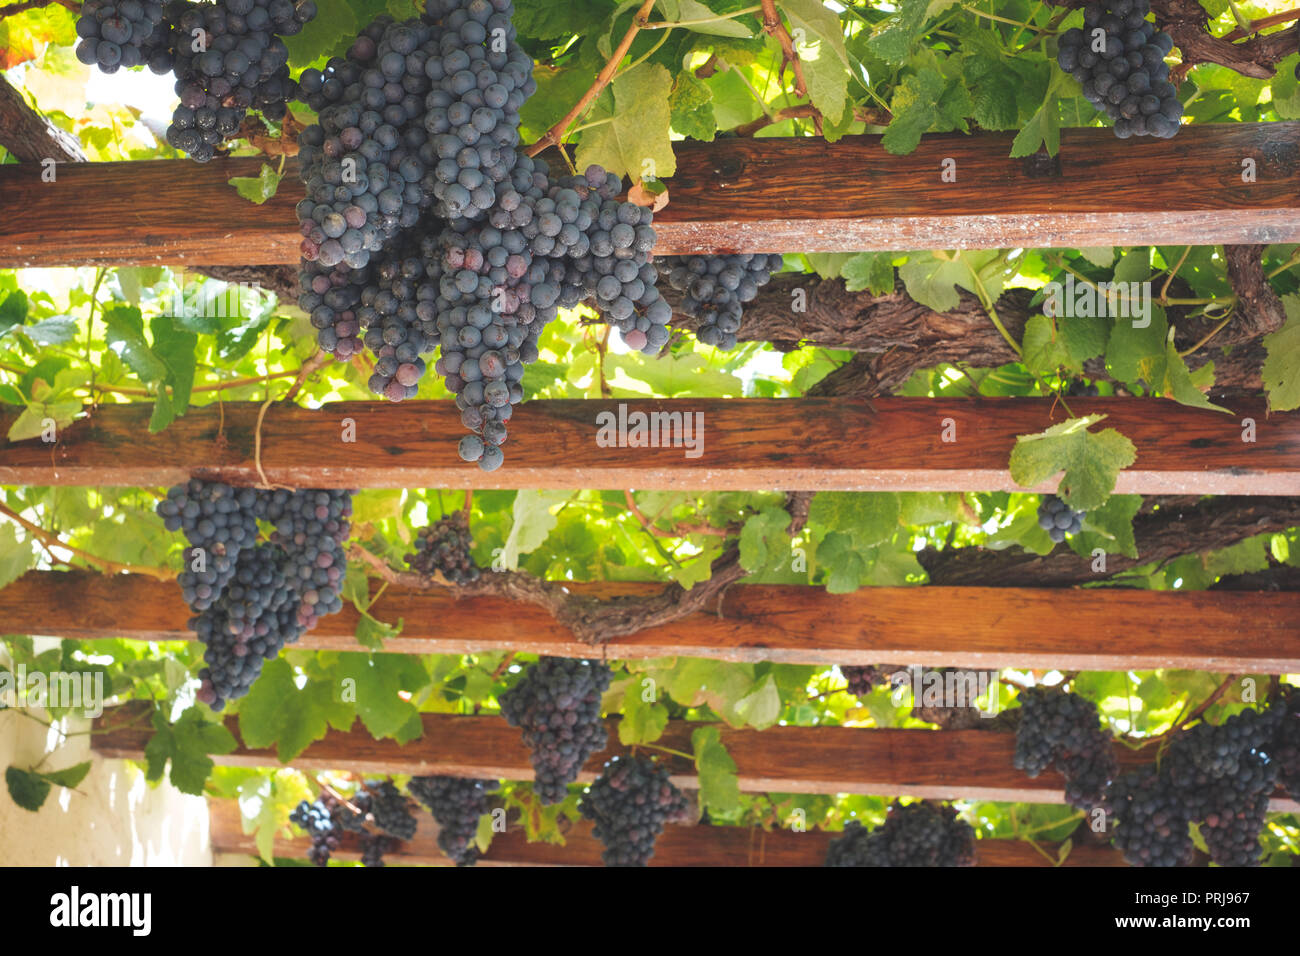 Ripe red clusters of grapes hanging on wooden beams , grapevines Stock Photo